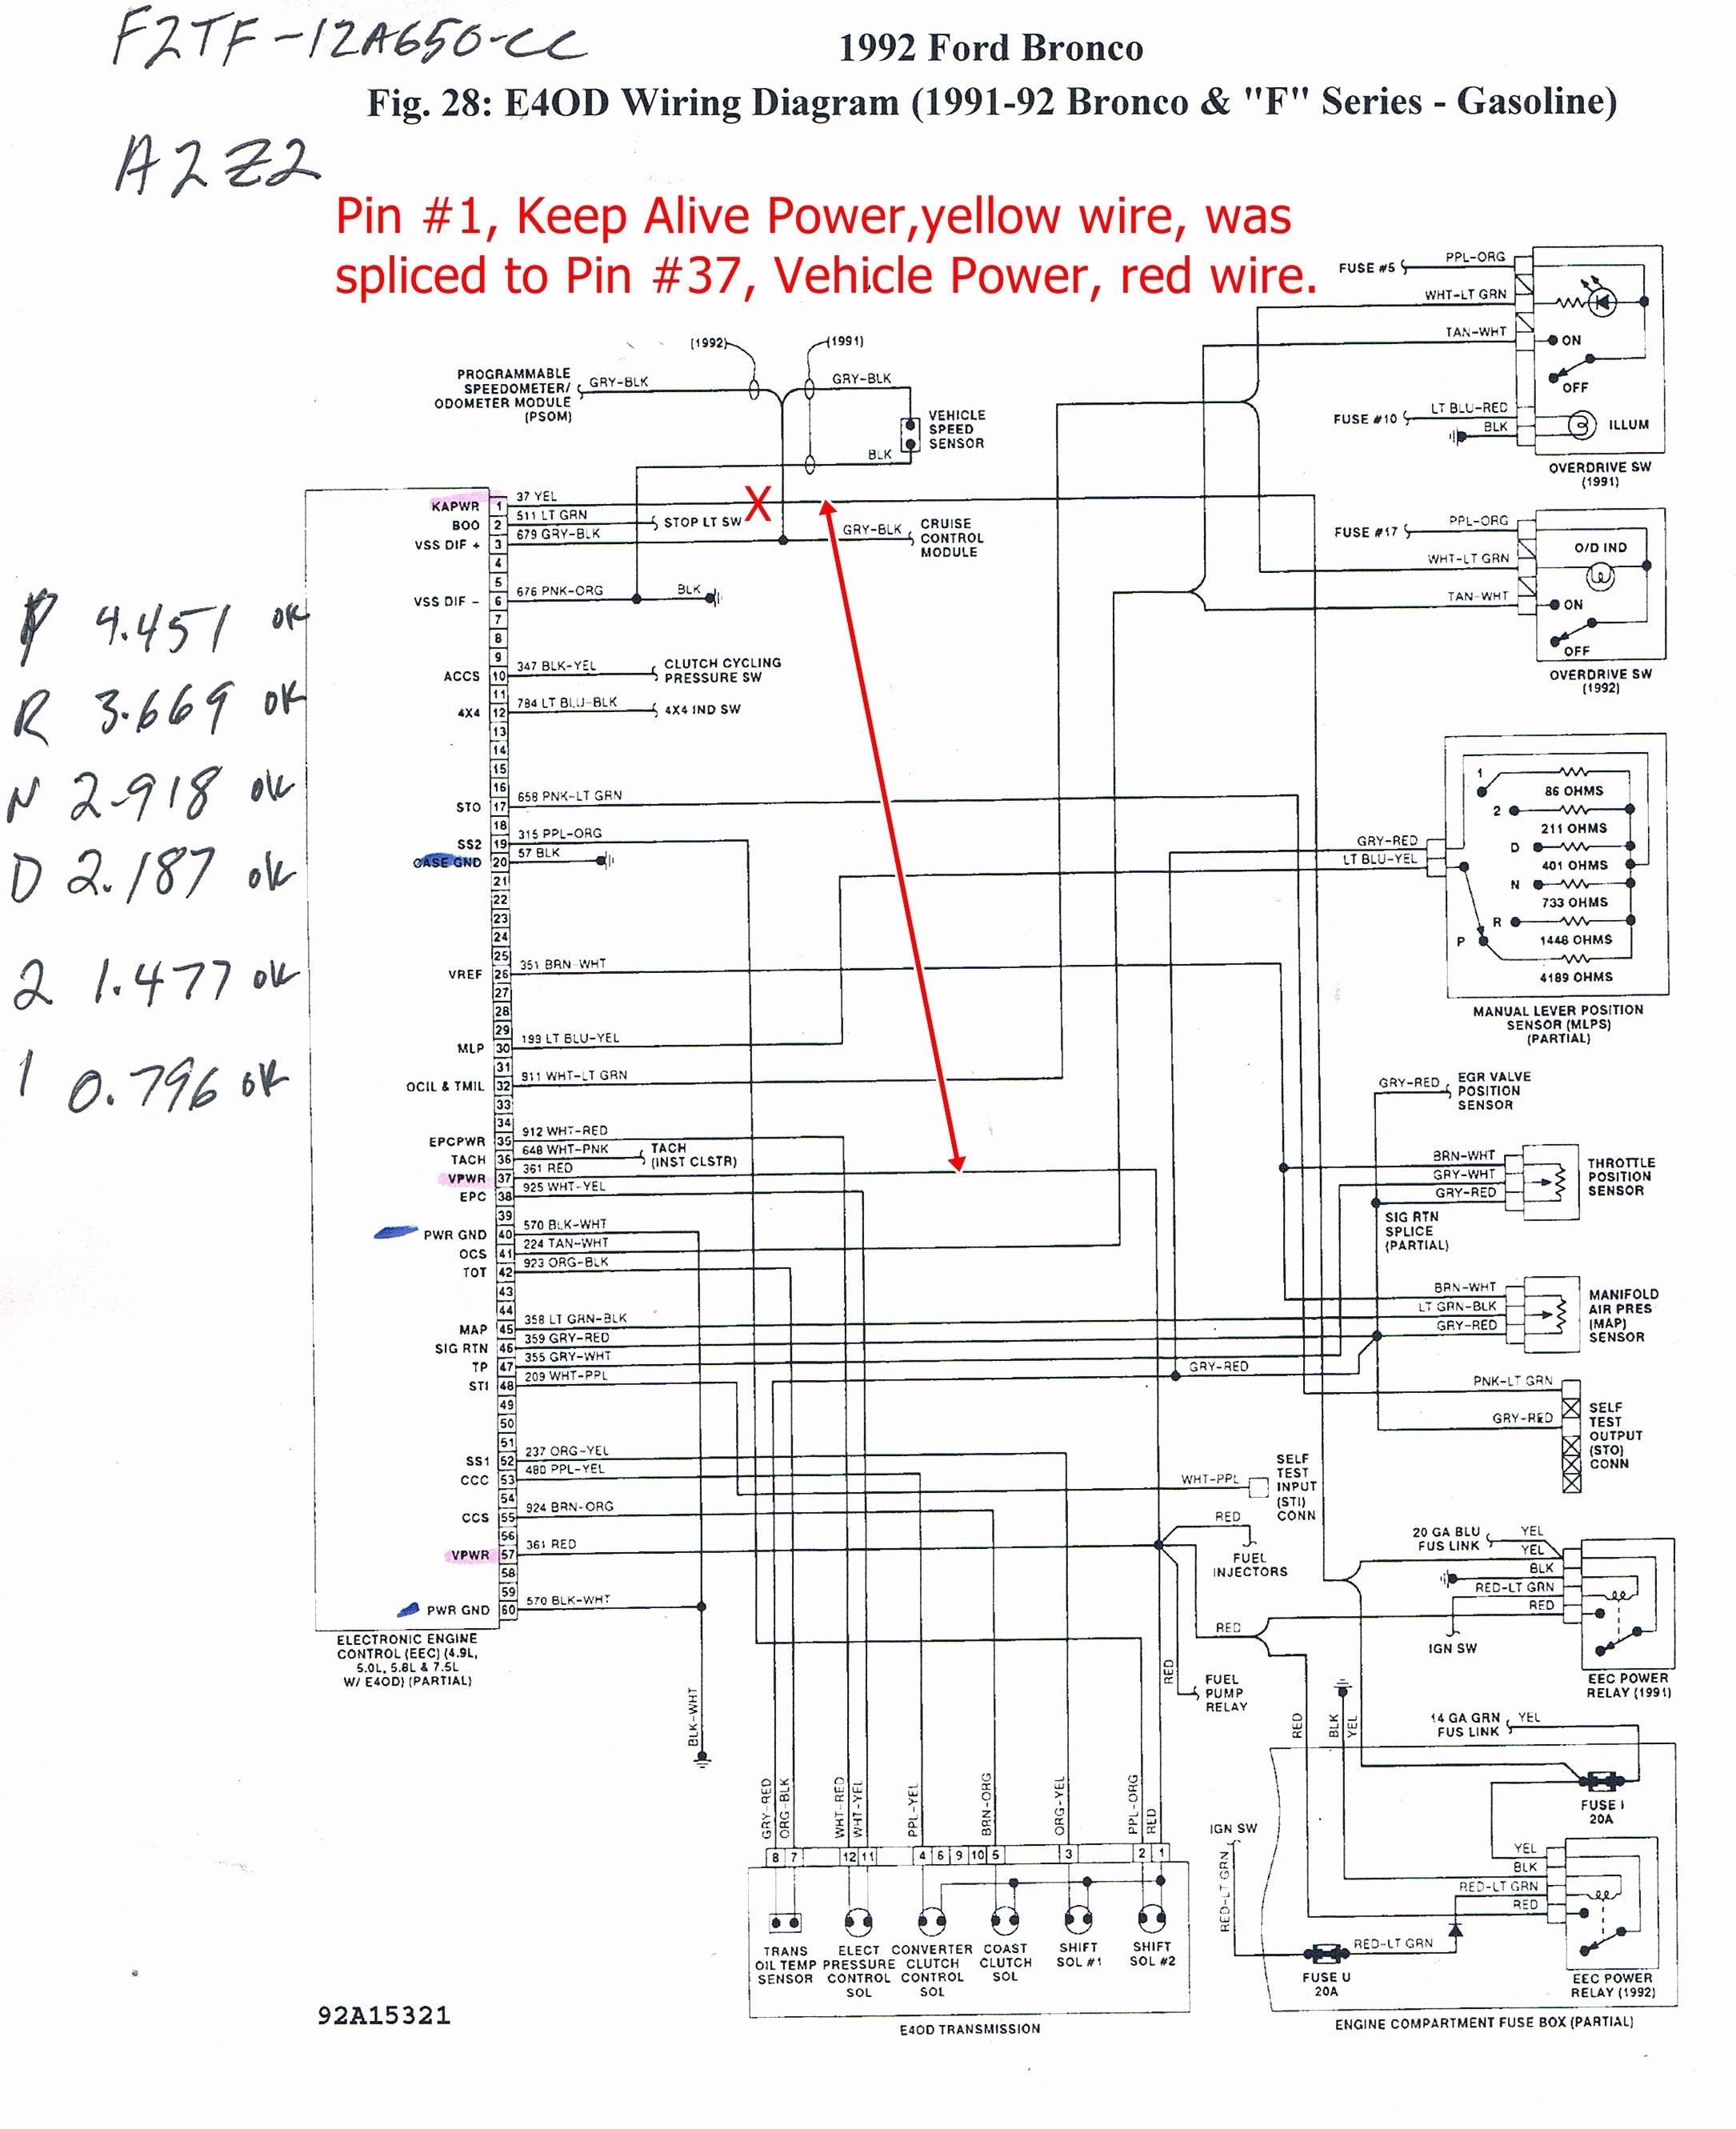 Emergency Relay Wiring Diagram Valid Awesome 4l60e Neutral Safety Switch Wiring